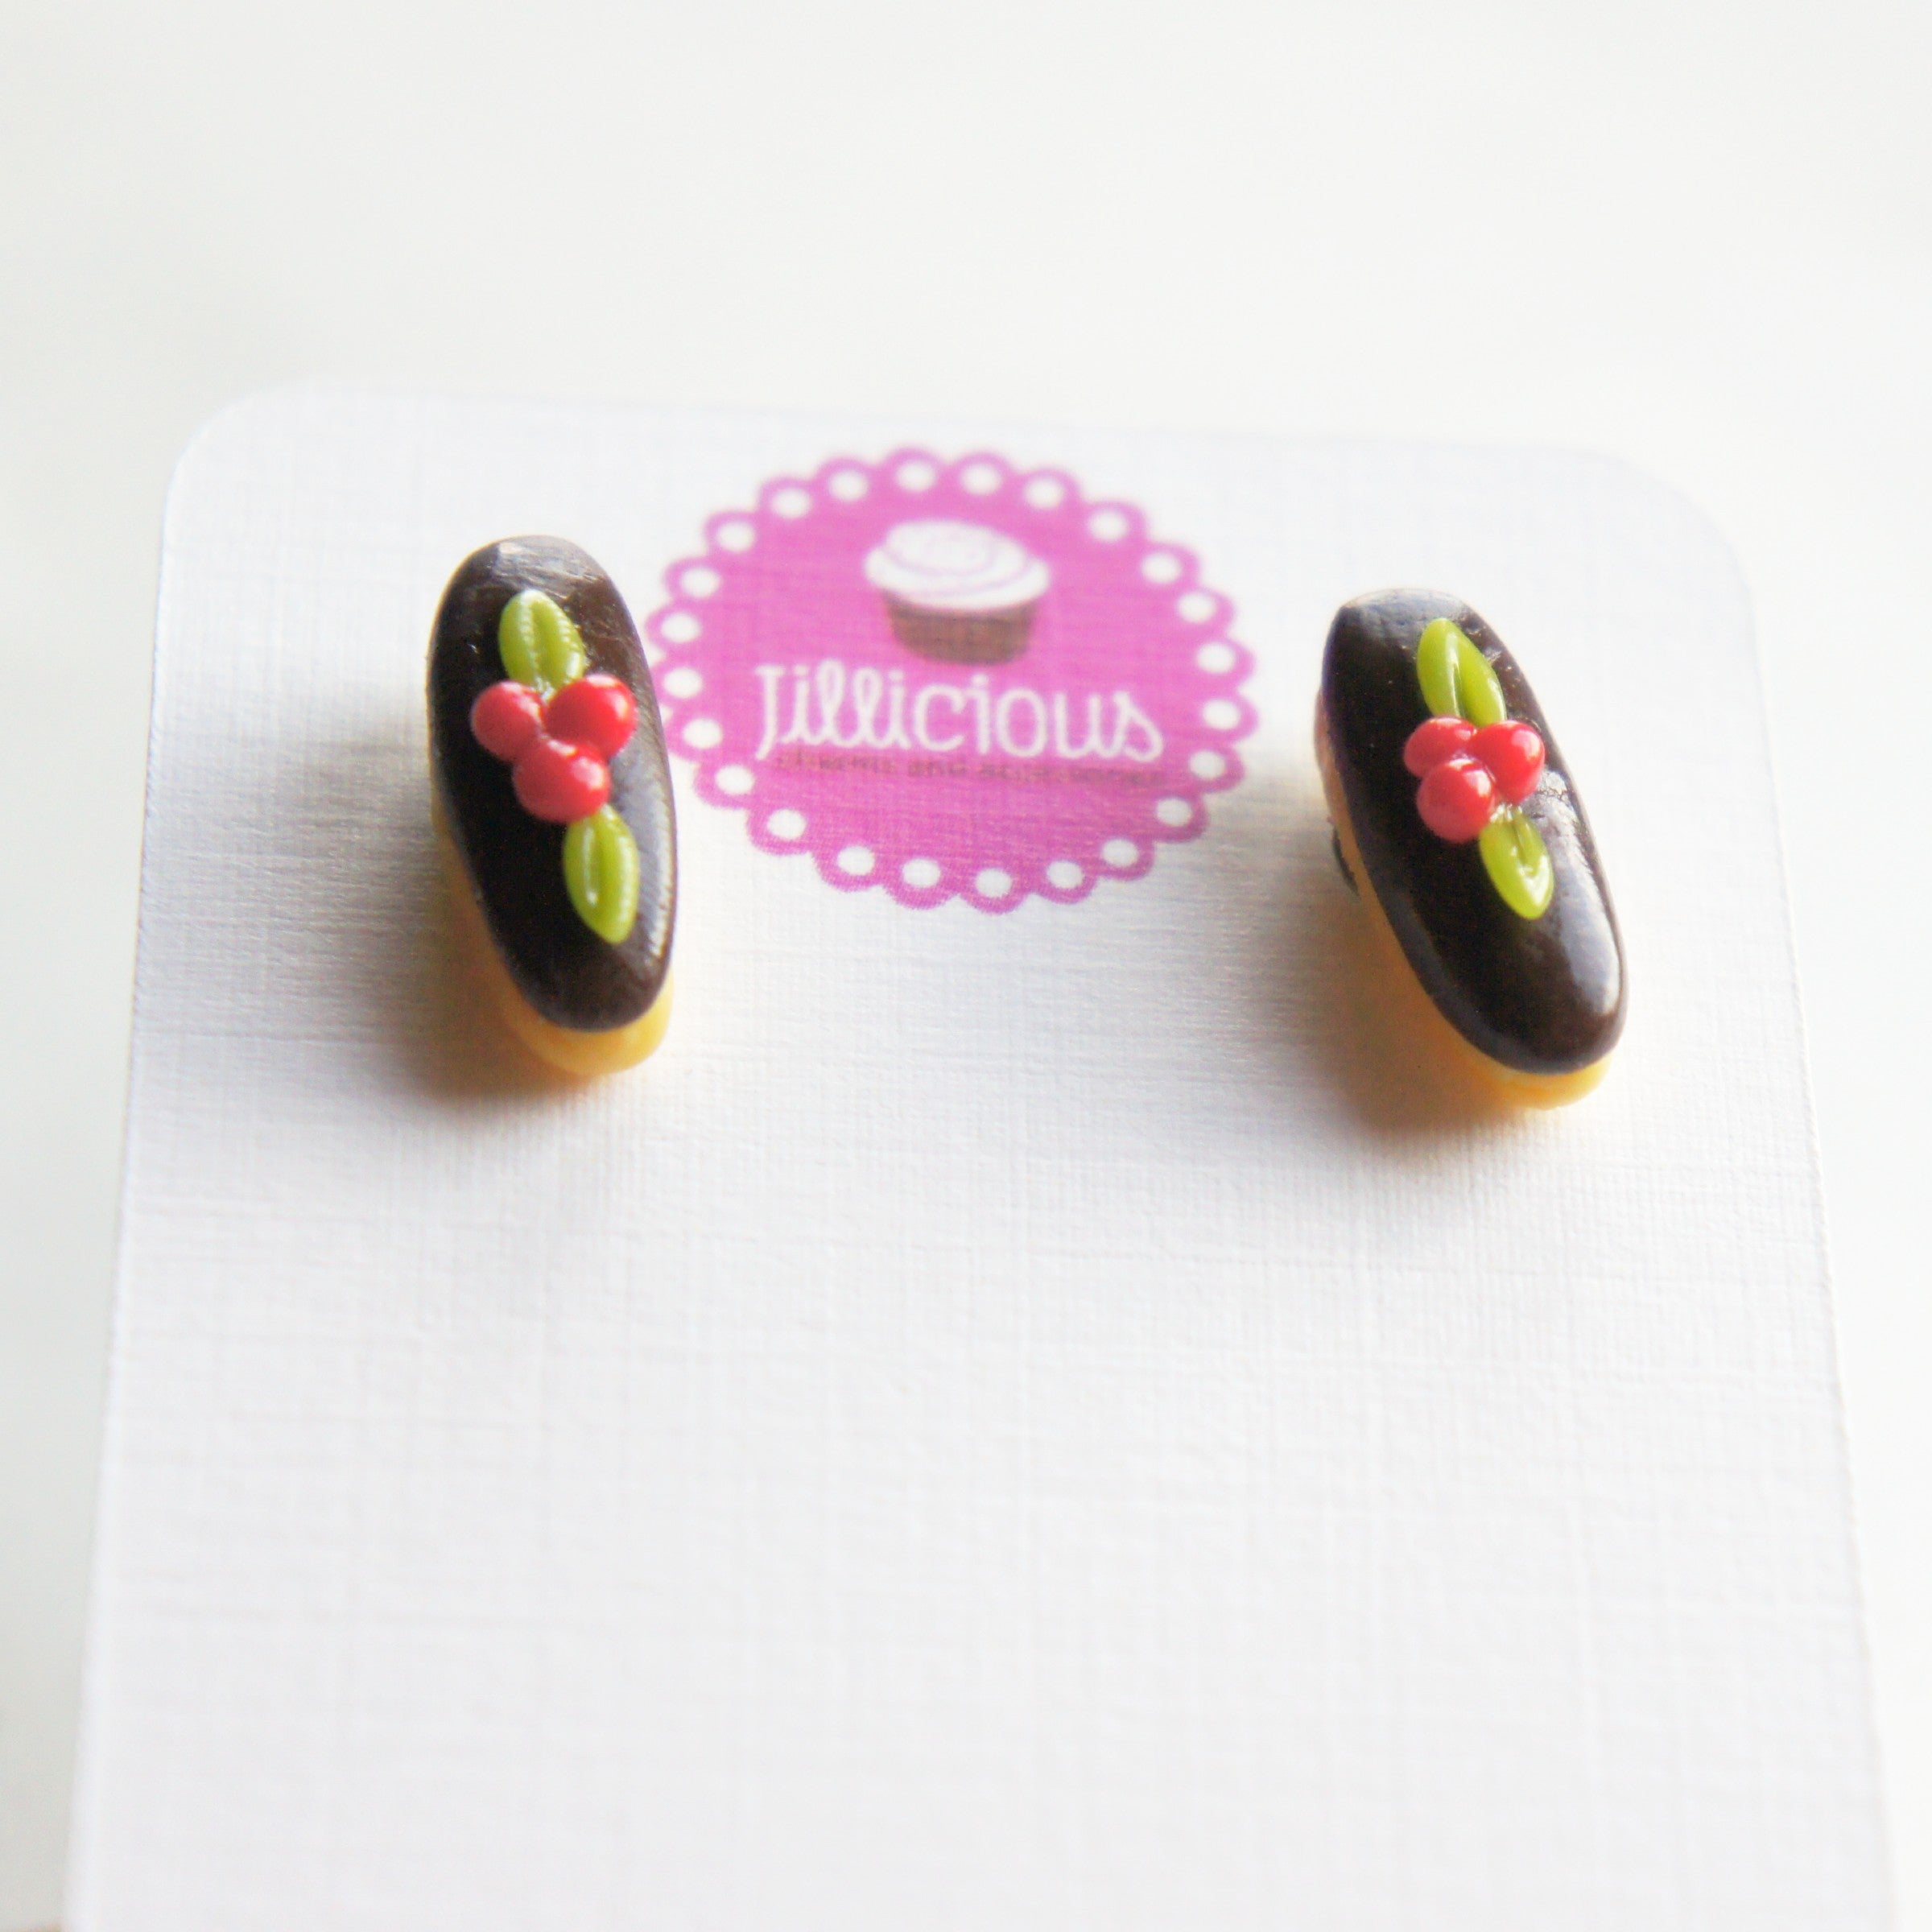 Holiday Chocolate Eclair Earrings - Jillicious charms and accessories